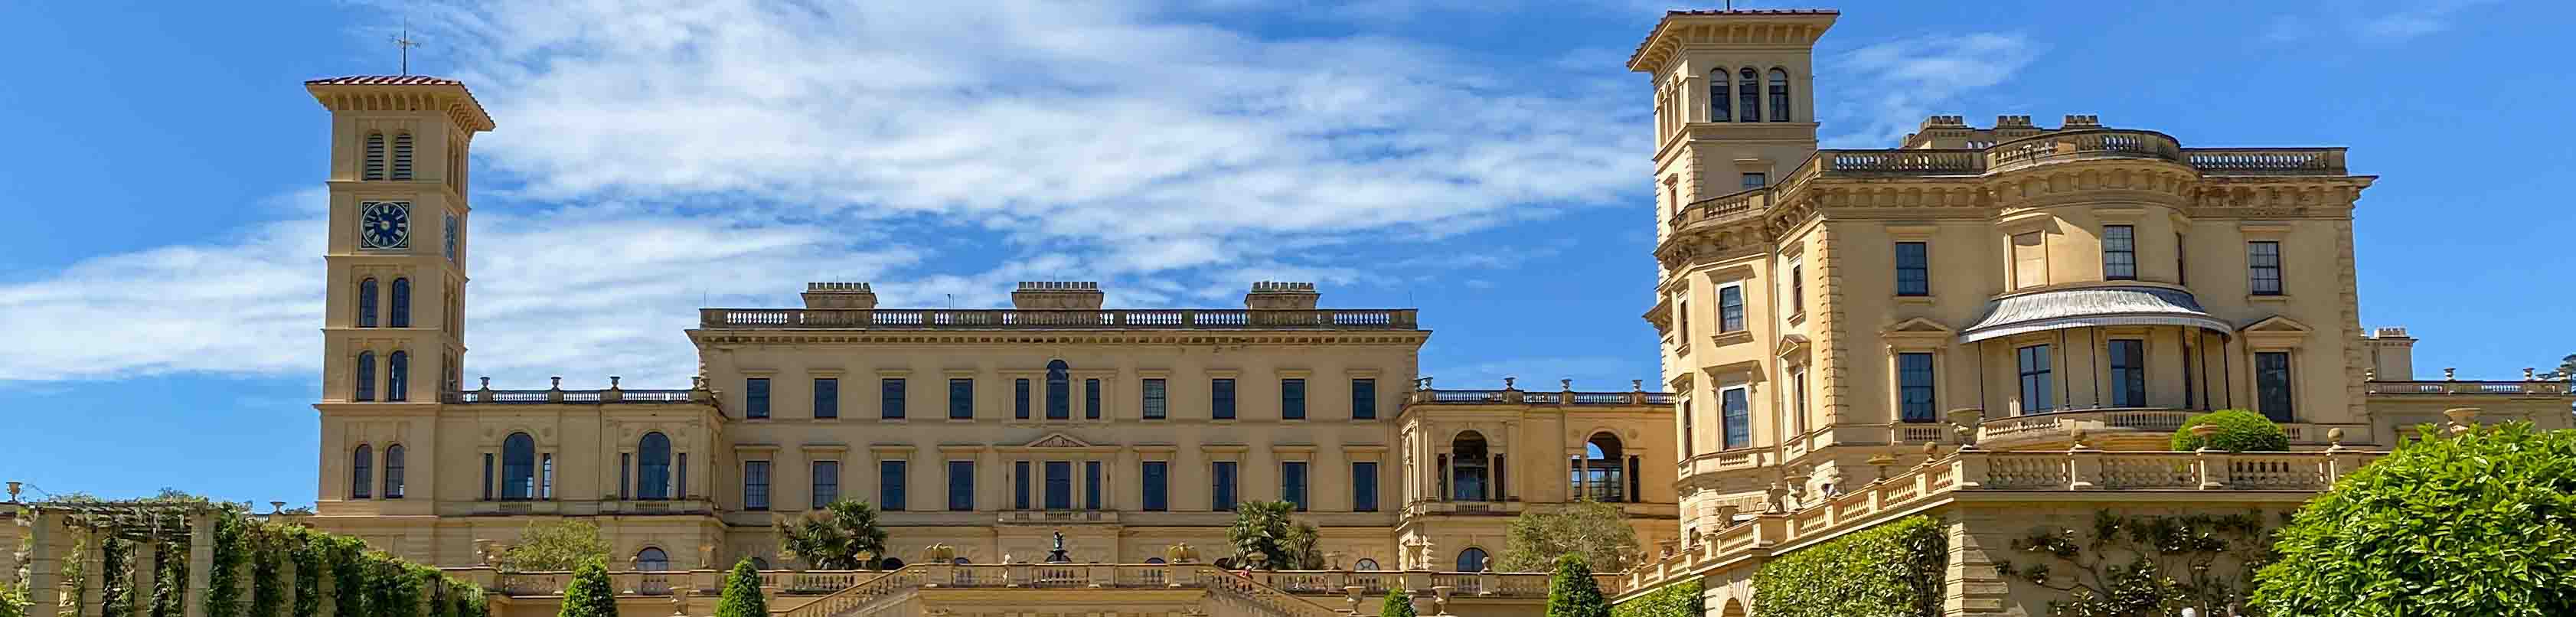 Queen for a day: A visit to Osborne House